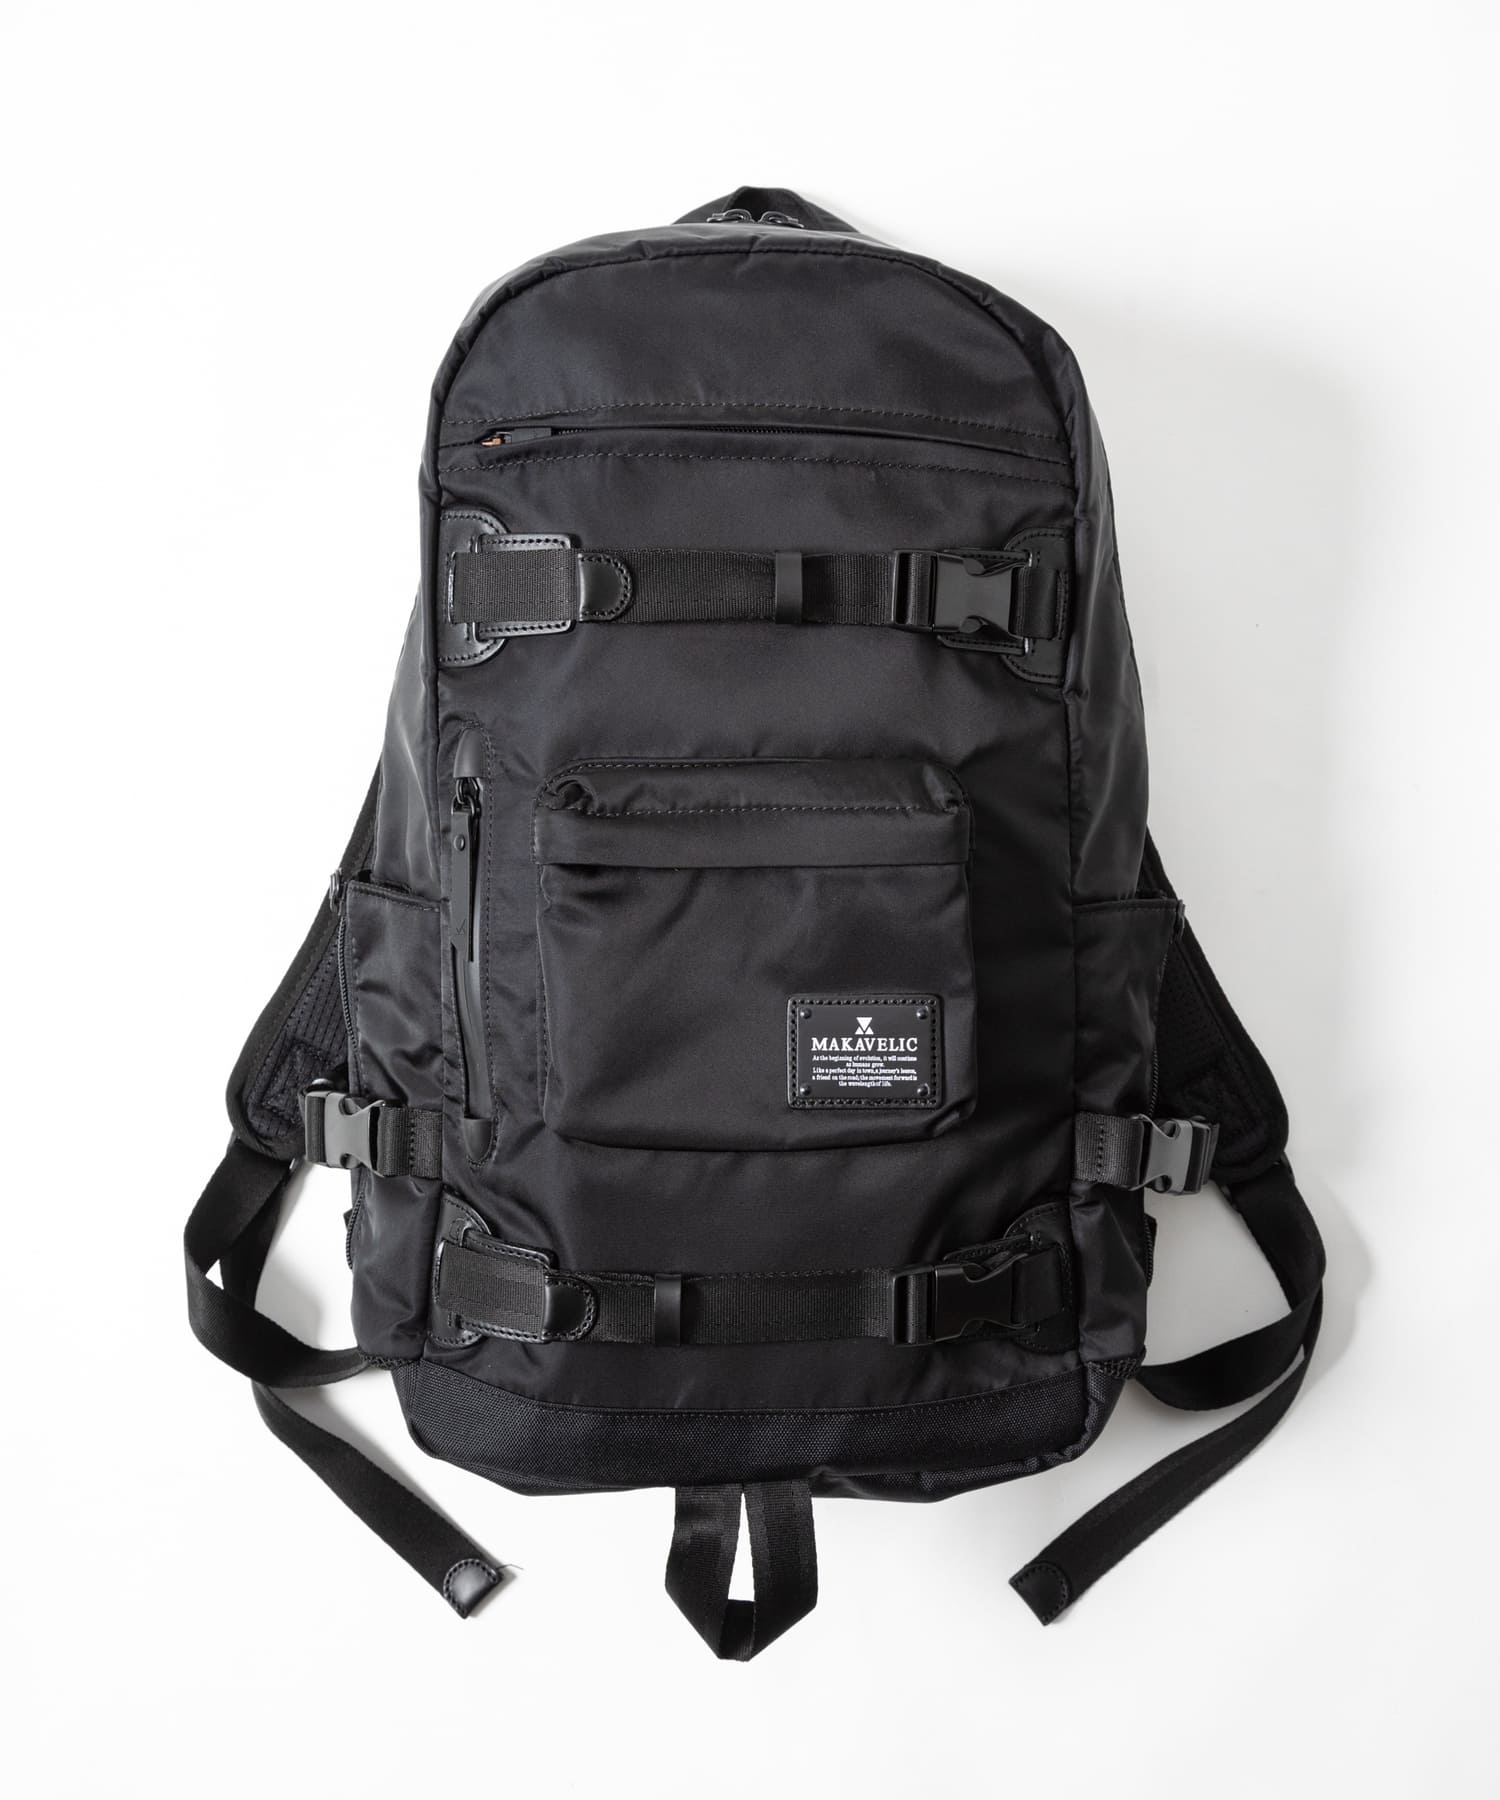 SUPERIORITY BIND UP 2 BACKPACK /  バックパック / リュック